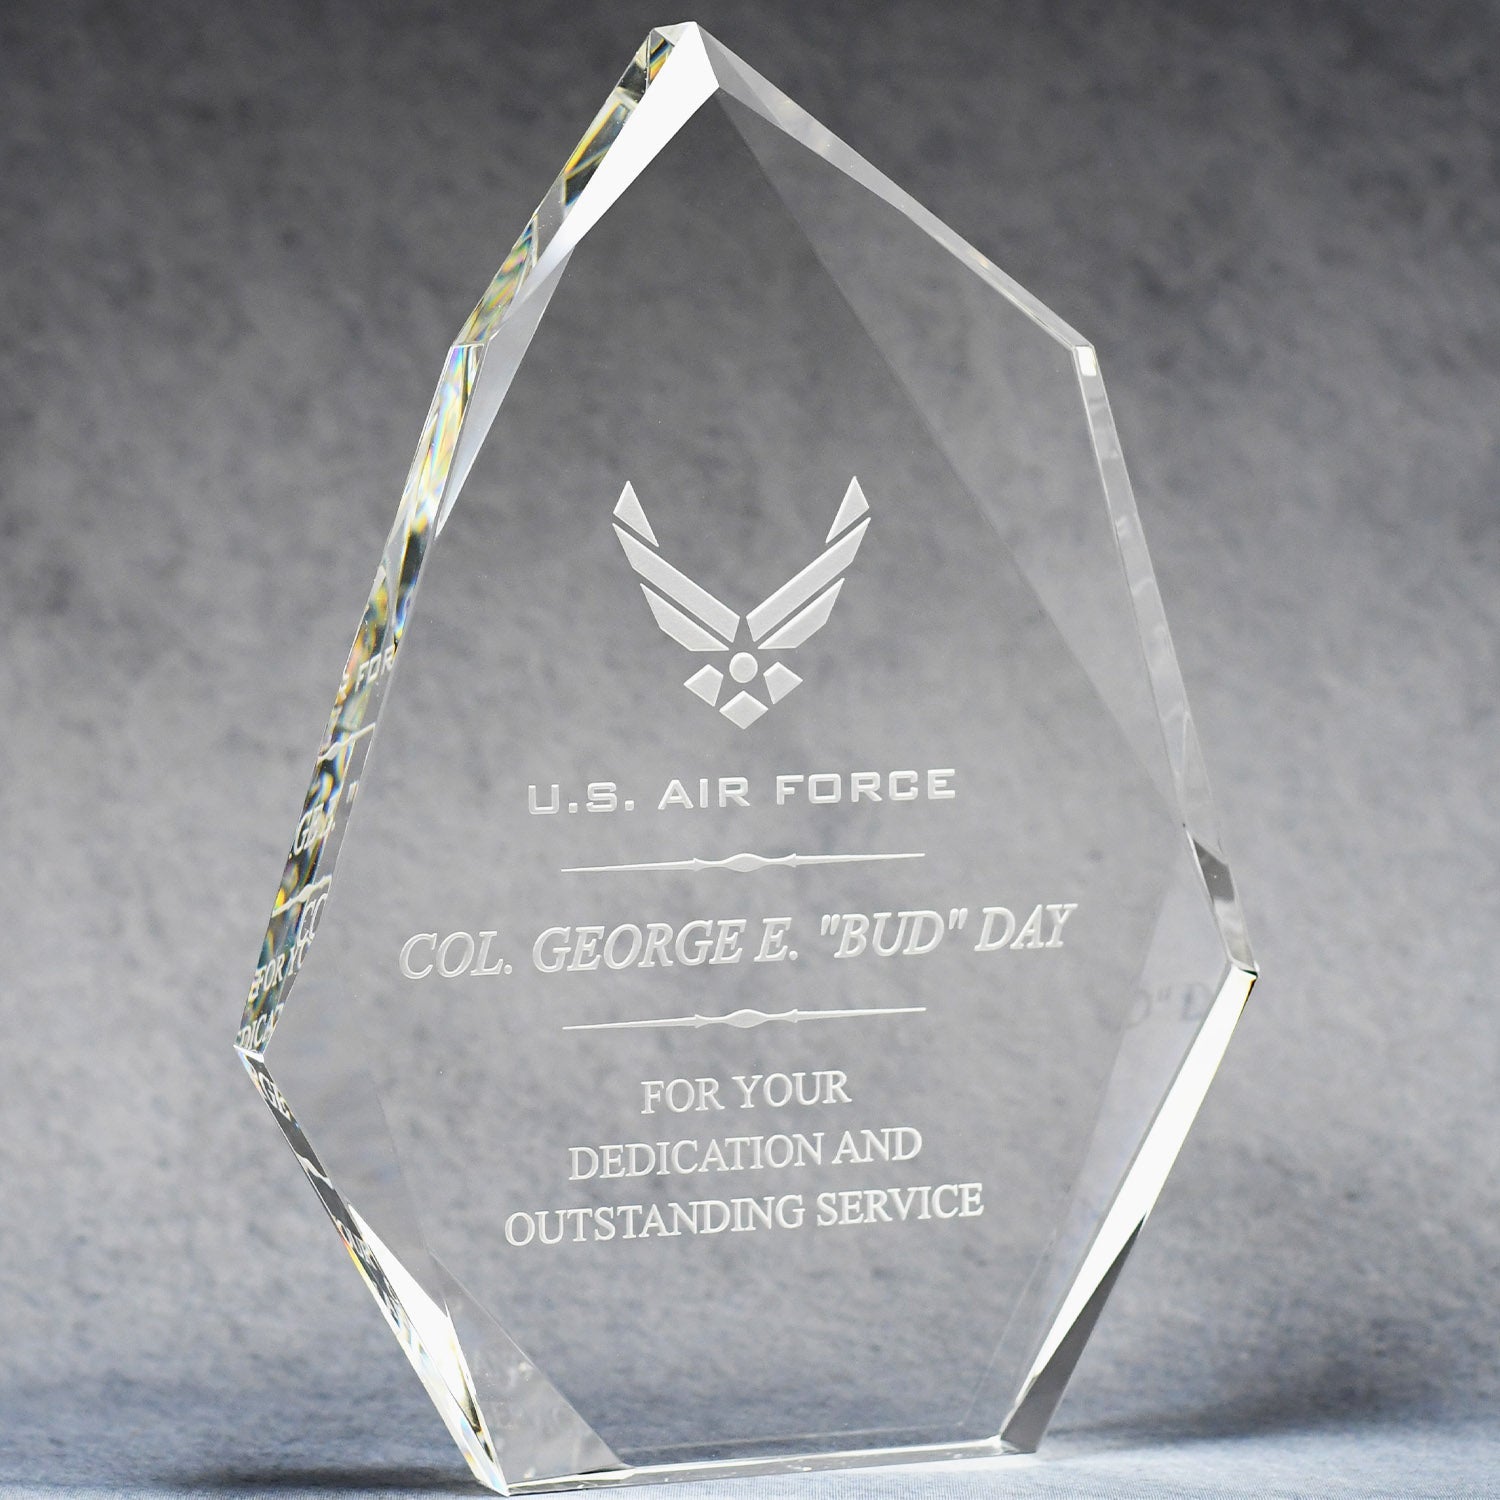 Multi-Faceted Optic Crystal Award | Global Recognition Inc